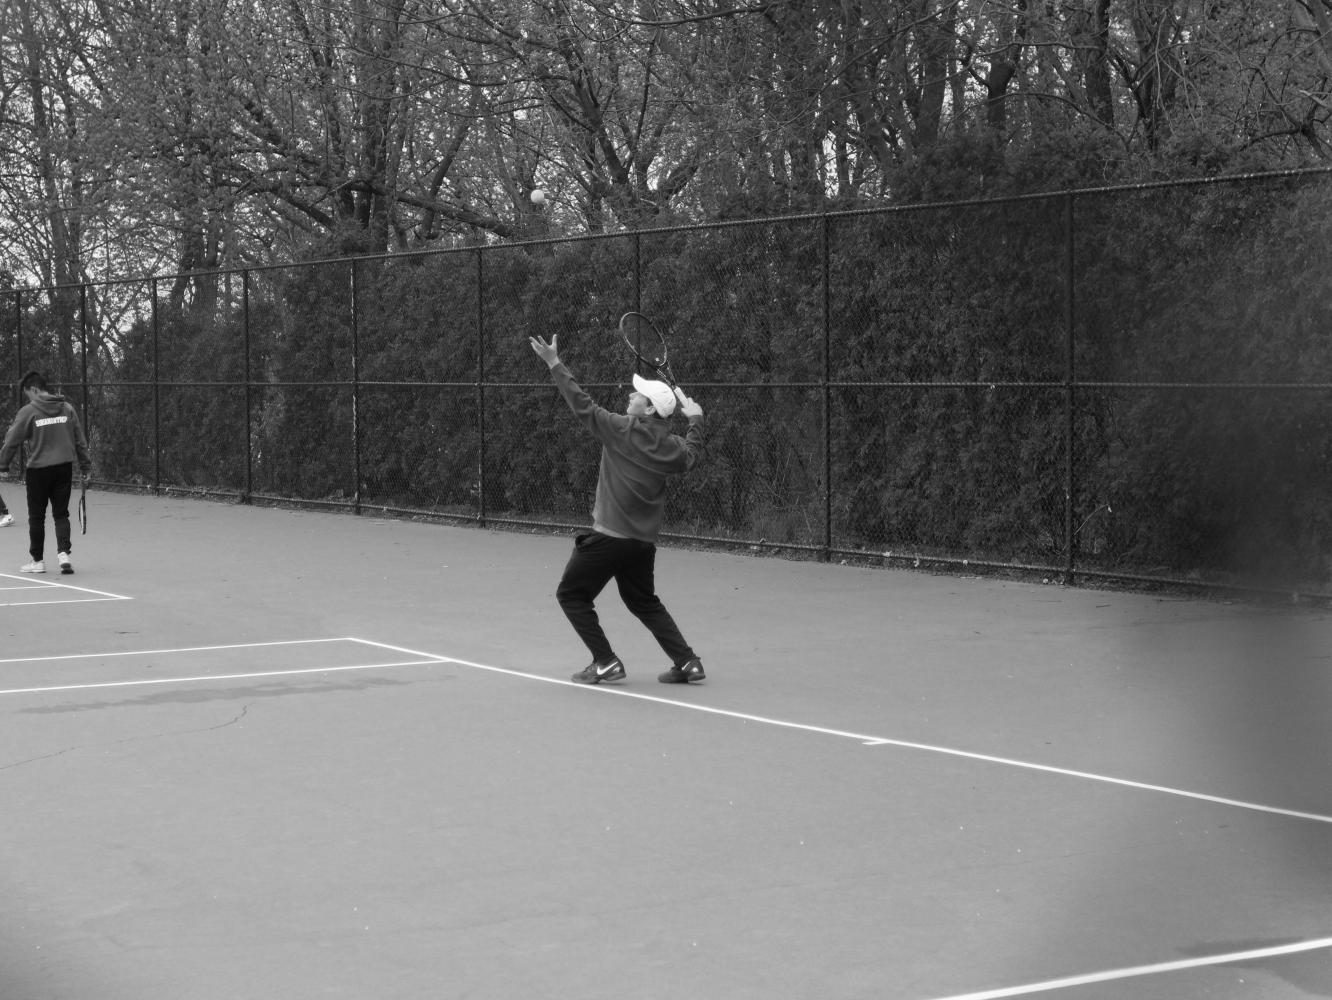 Senior+Austin+Agna+prepares+to+serve+the+ball+against+Cold+Spring+Harbor+at+a+home+match+on+April+5.+The+Vikings+won+the+match+6-1.